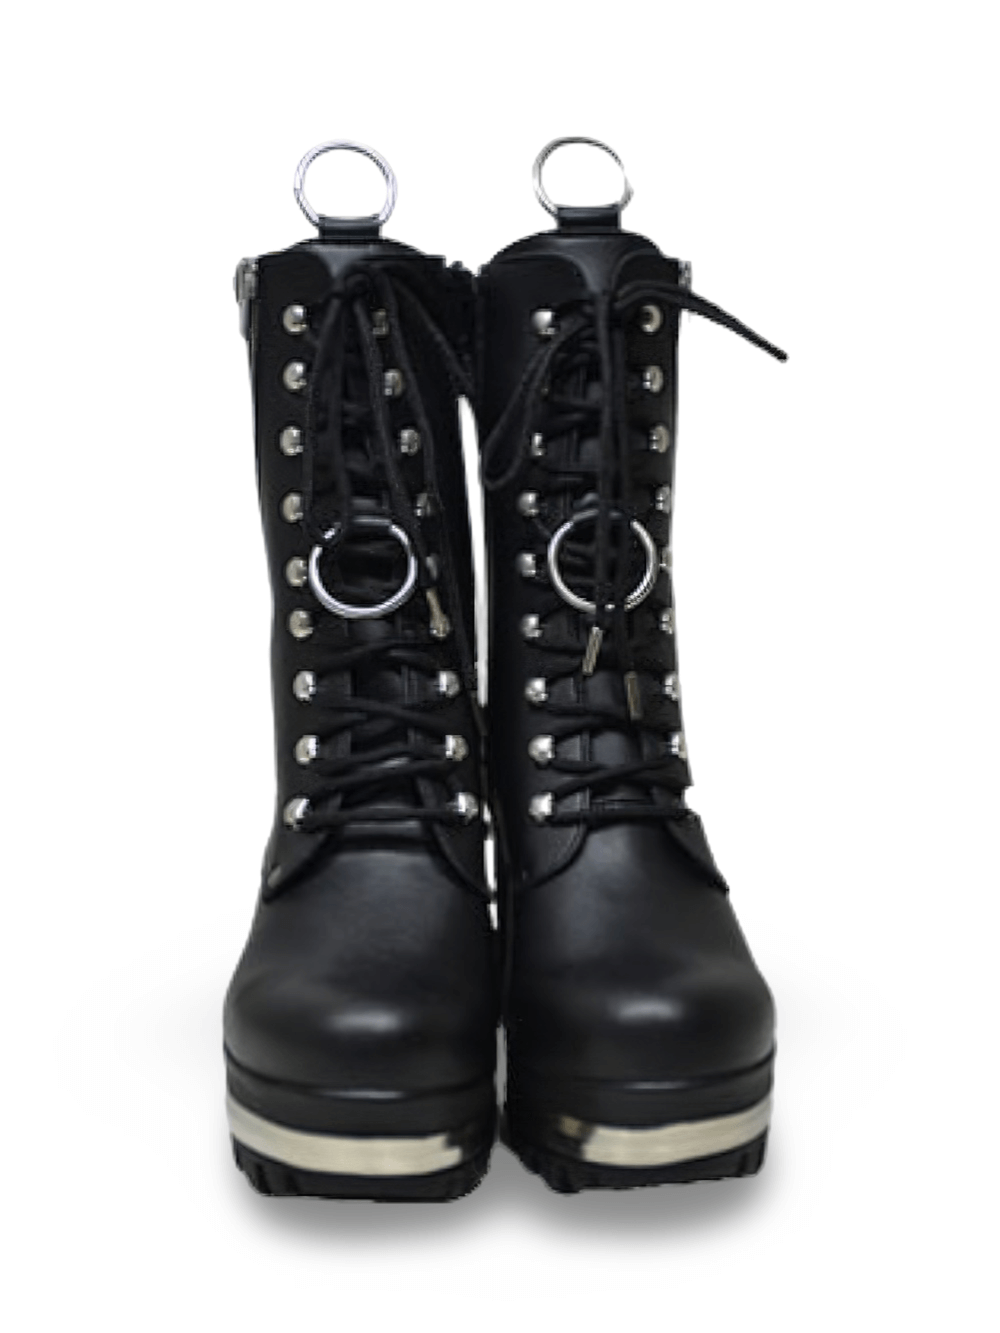 Stylish Black Laced Boots with Metal Heel Plate